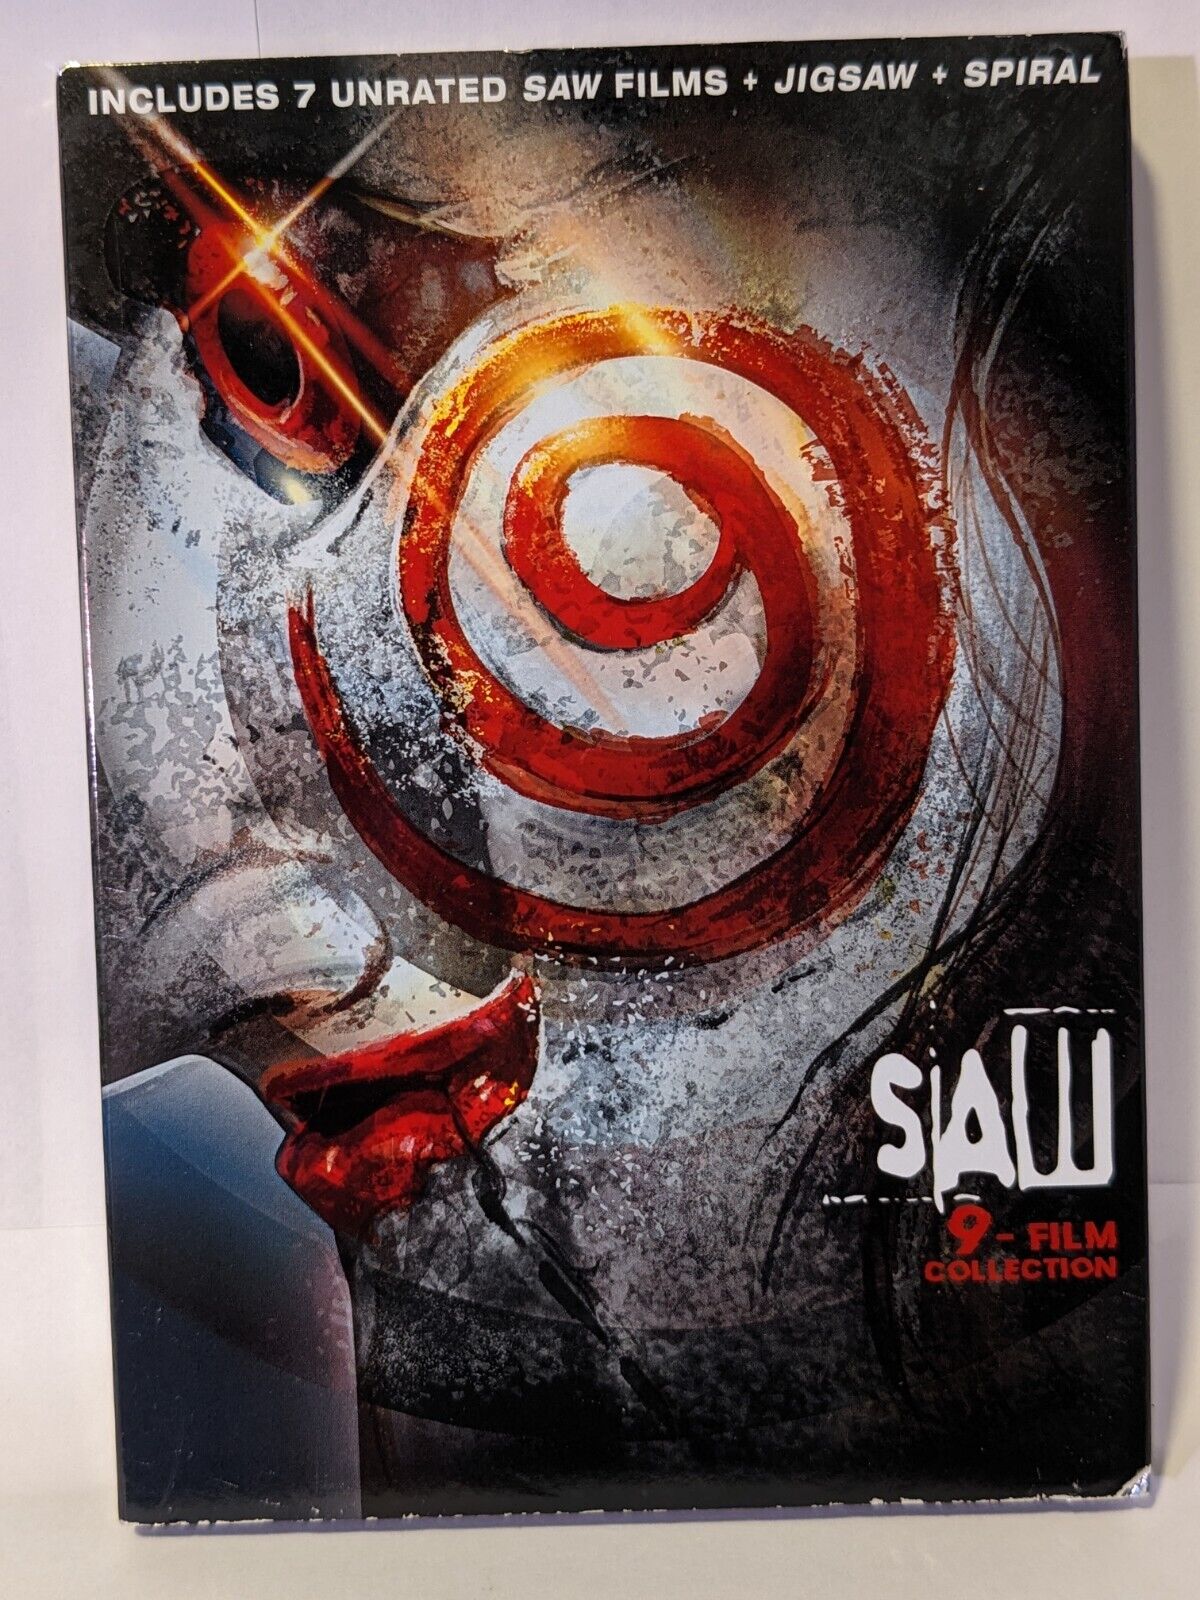 Saw Franchise 9 Film Collection DVD Unrated Jigsaw Spiral Horror W/ Slipcover